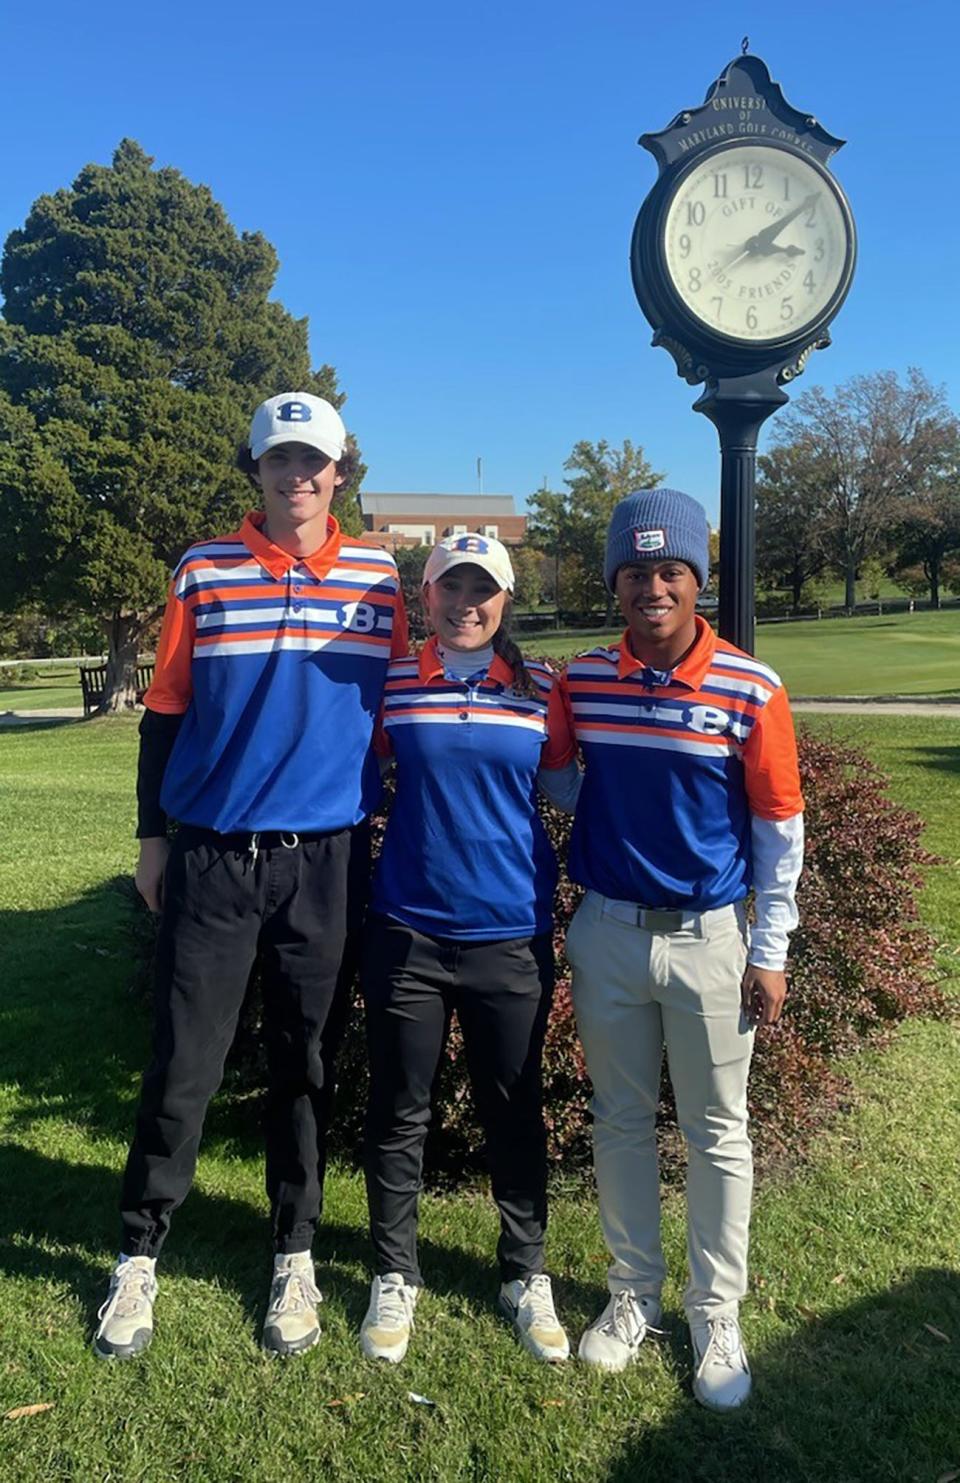 From left, Boonsboro's Nickel Lawrence, Piper Meredith and Kadan Jones made the cut for Wednesday's championship round of the Maryland state golf tournament at the University of Maryland course in College Park.